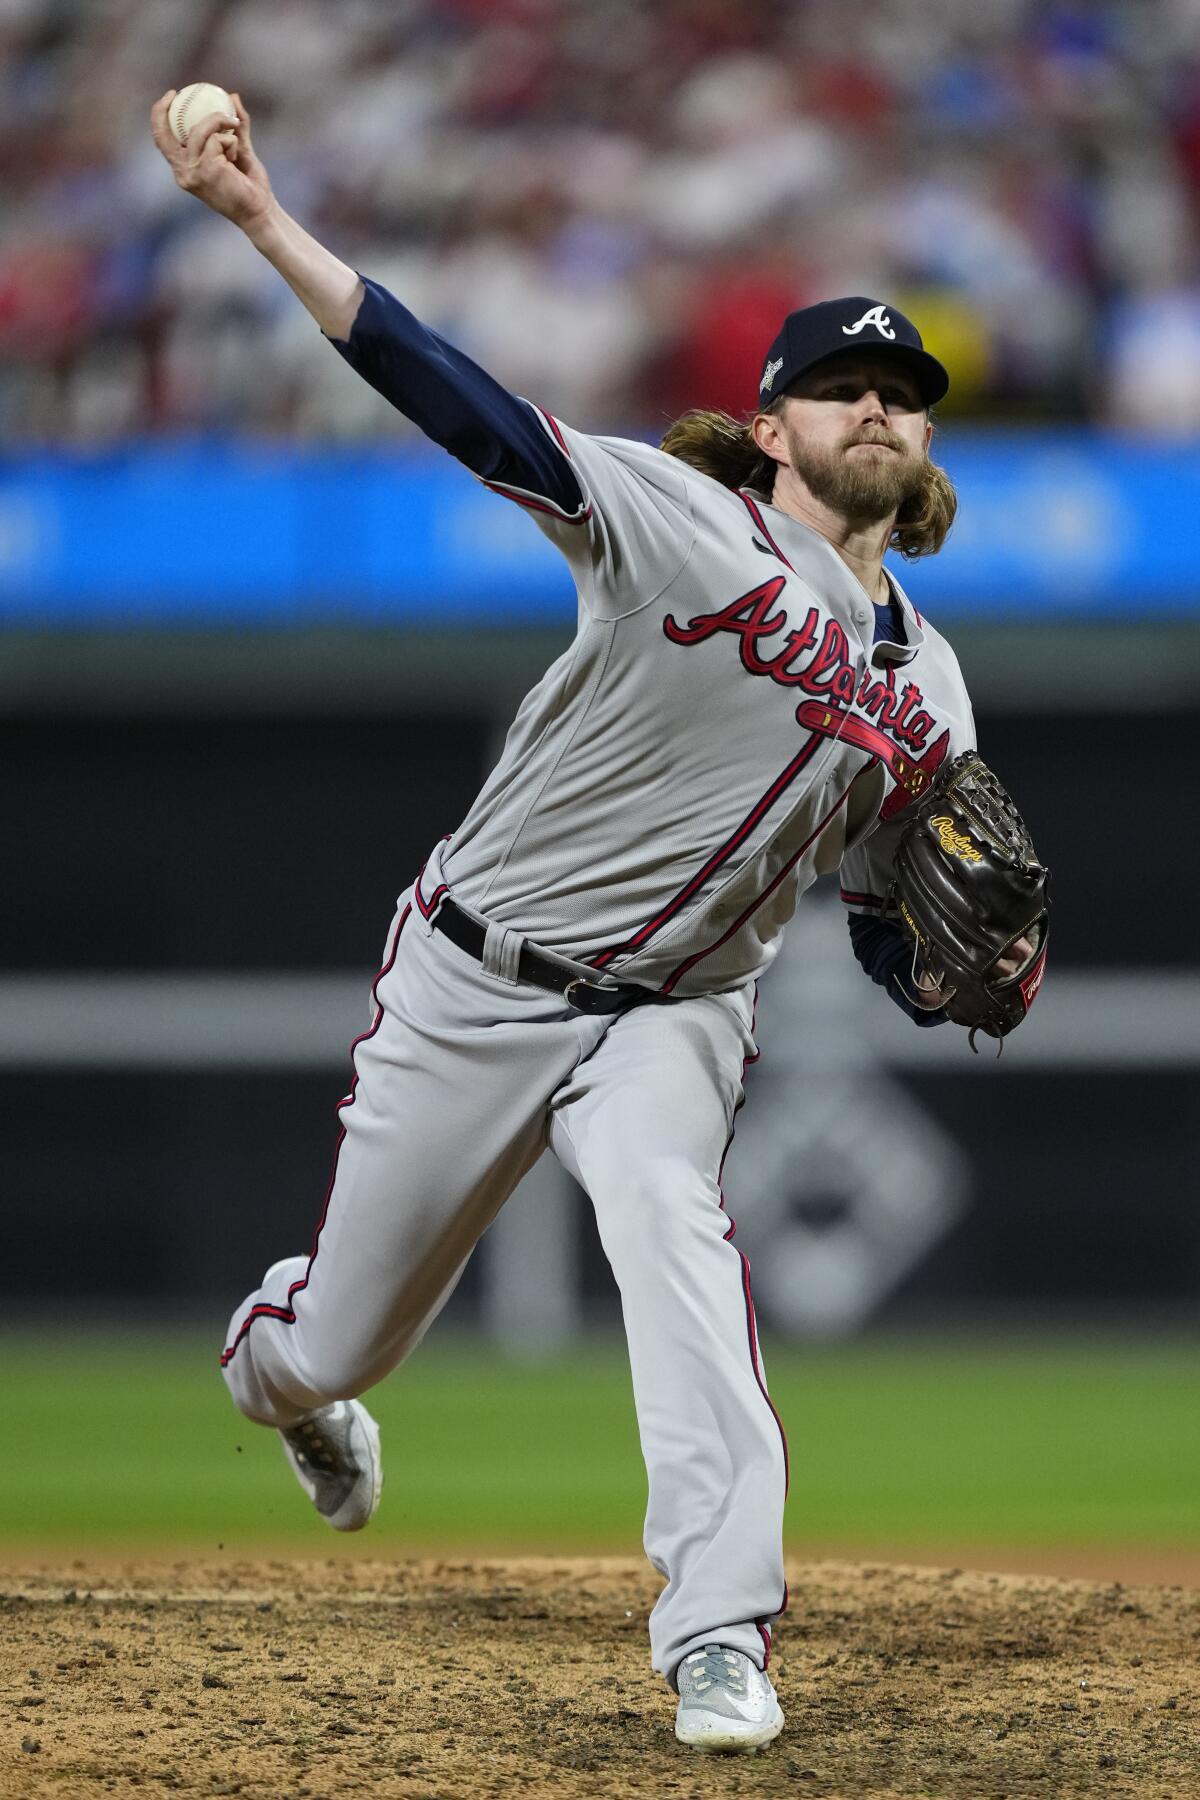 Braves reliever Matzek ruled out of postseason due to Tommy John surgery